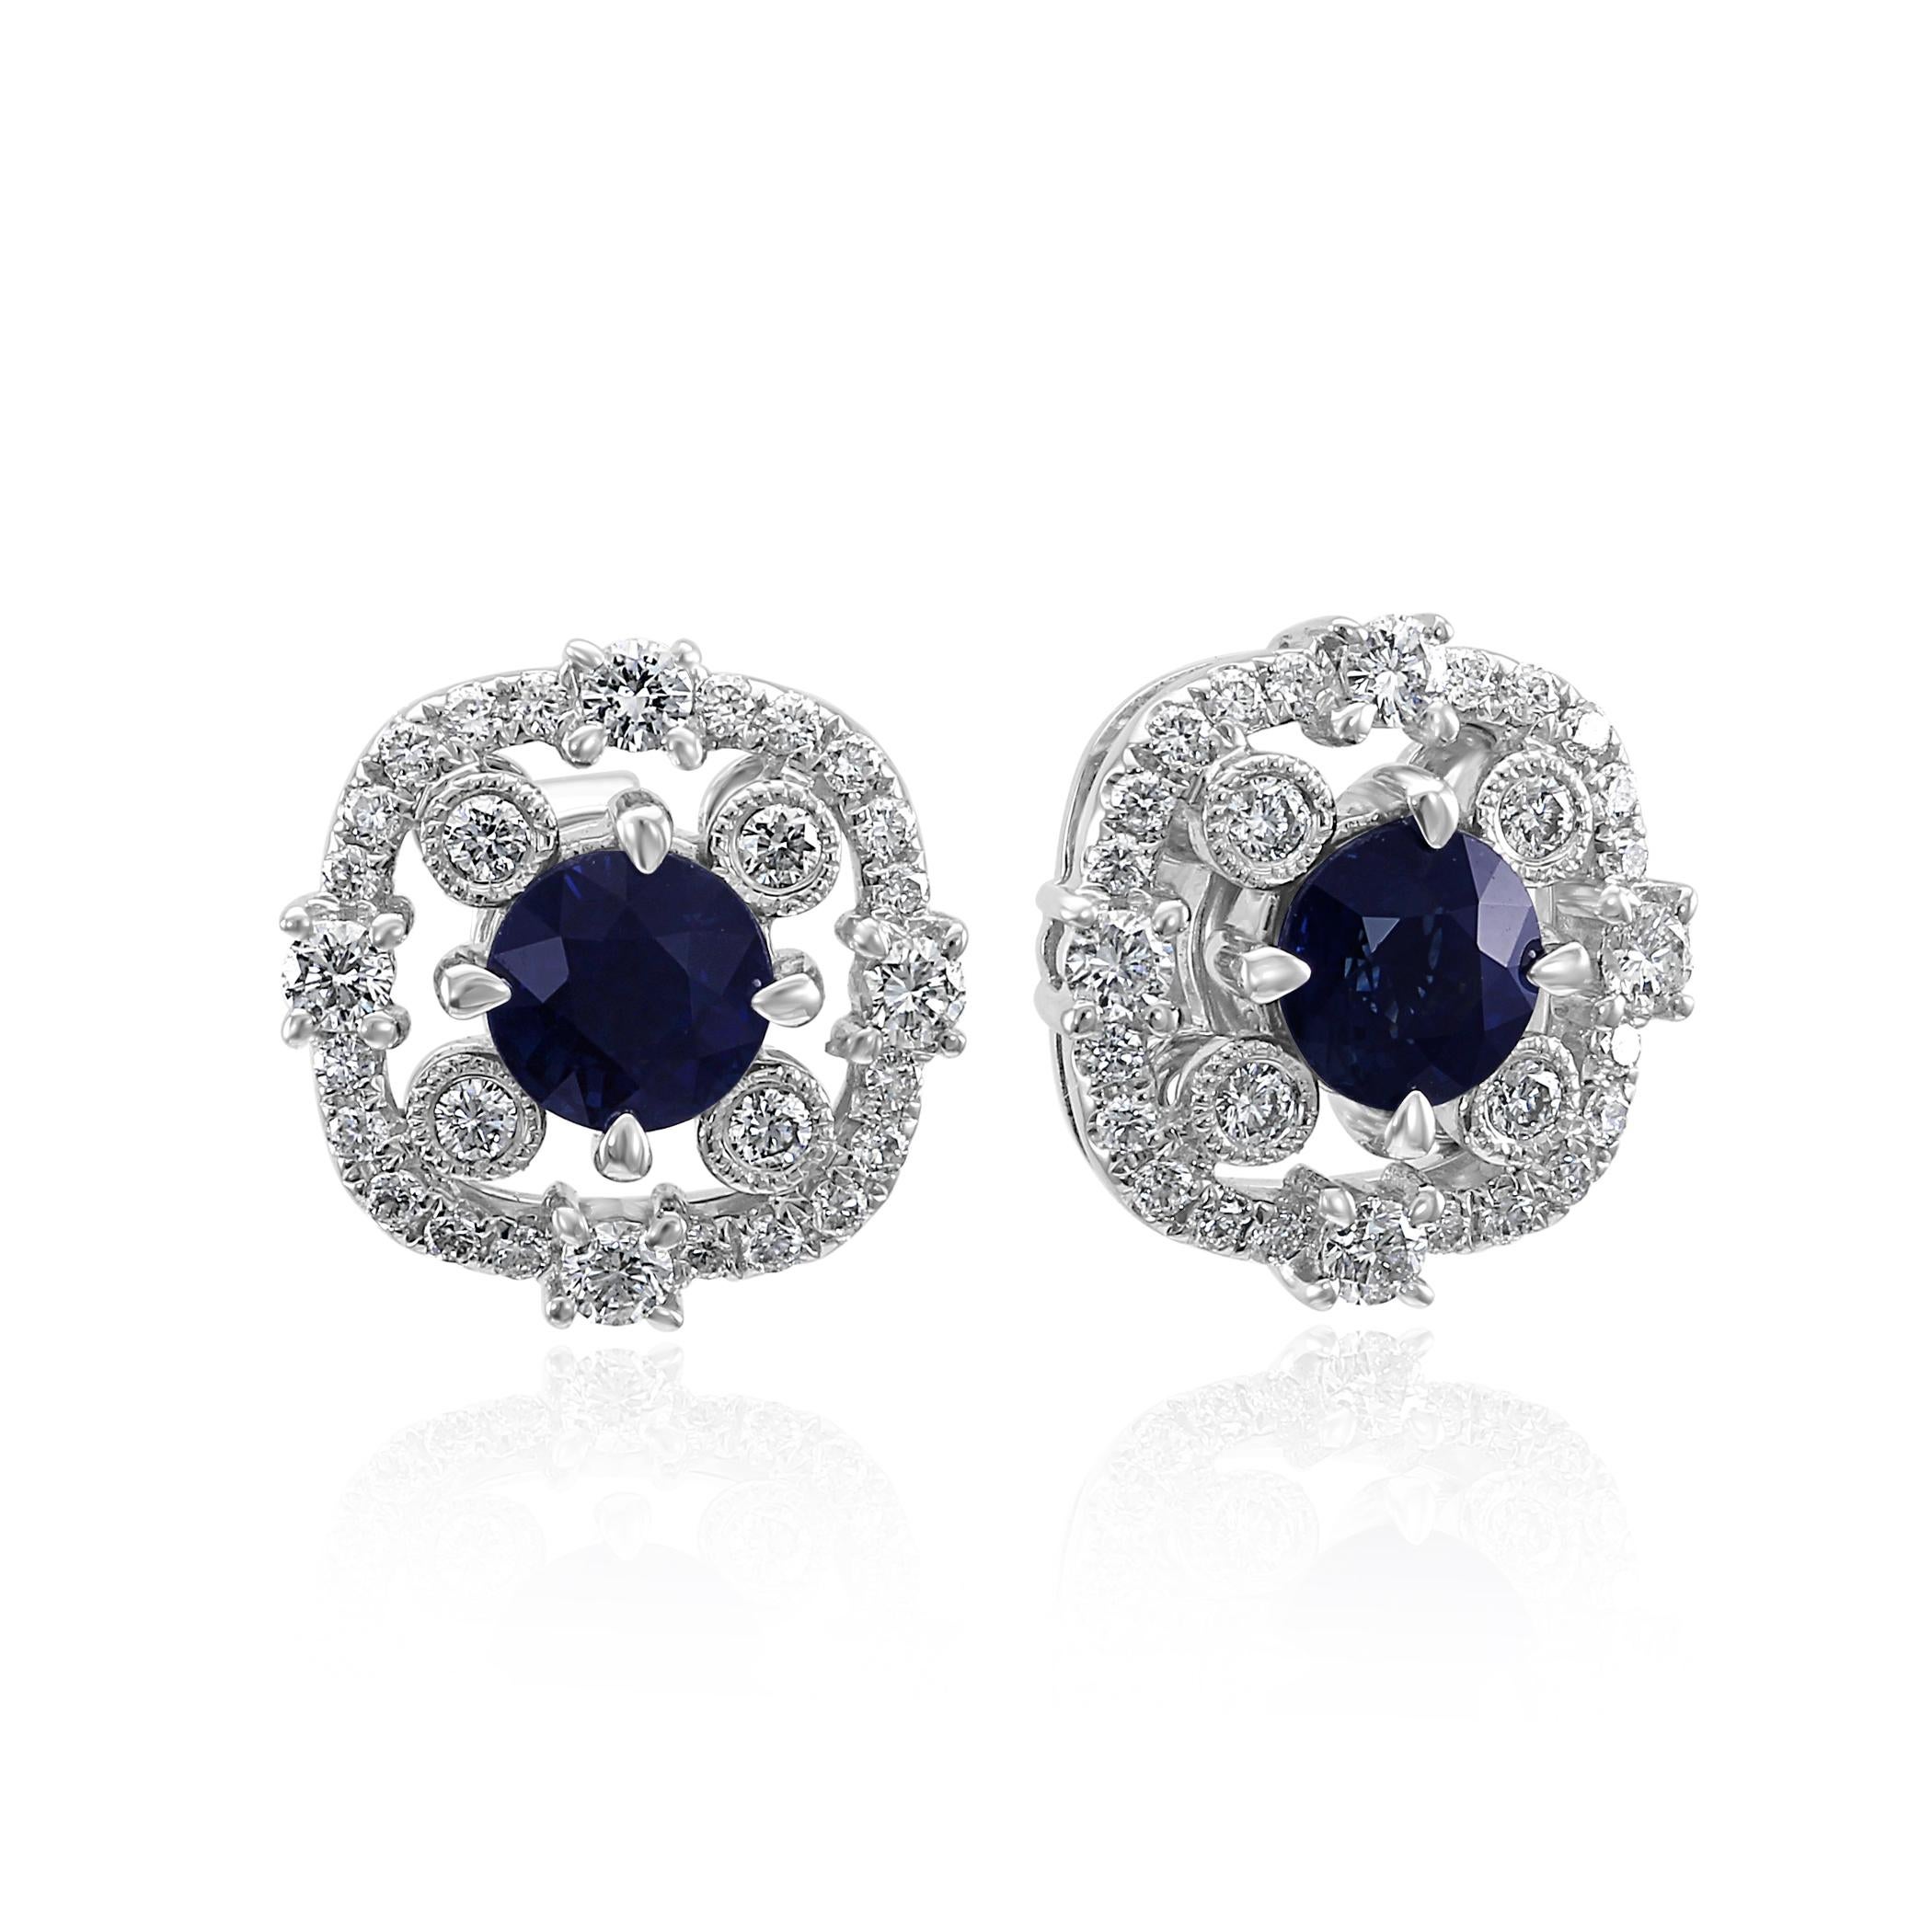 2 Gorgeous Blue Sapphire Round 1.62 Carat Encircled in Halo of 56 White Colorless VS-SI Diamond Rounds  0.66 Carats set in Gorgeous 4 Prong 18K White Gold Stud Earring.

MADE IN USA
Total Stone Weight 2.28 Carat

Style available in different price